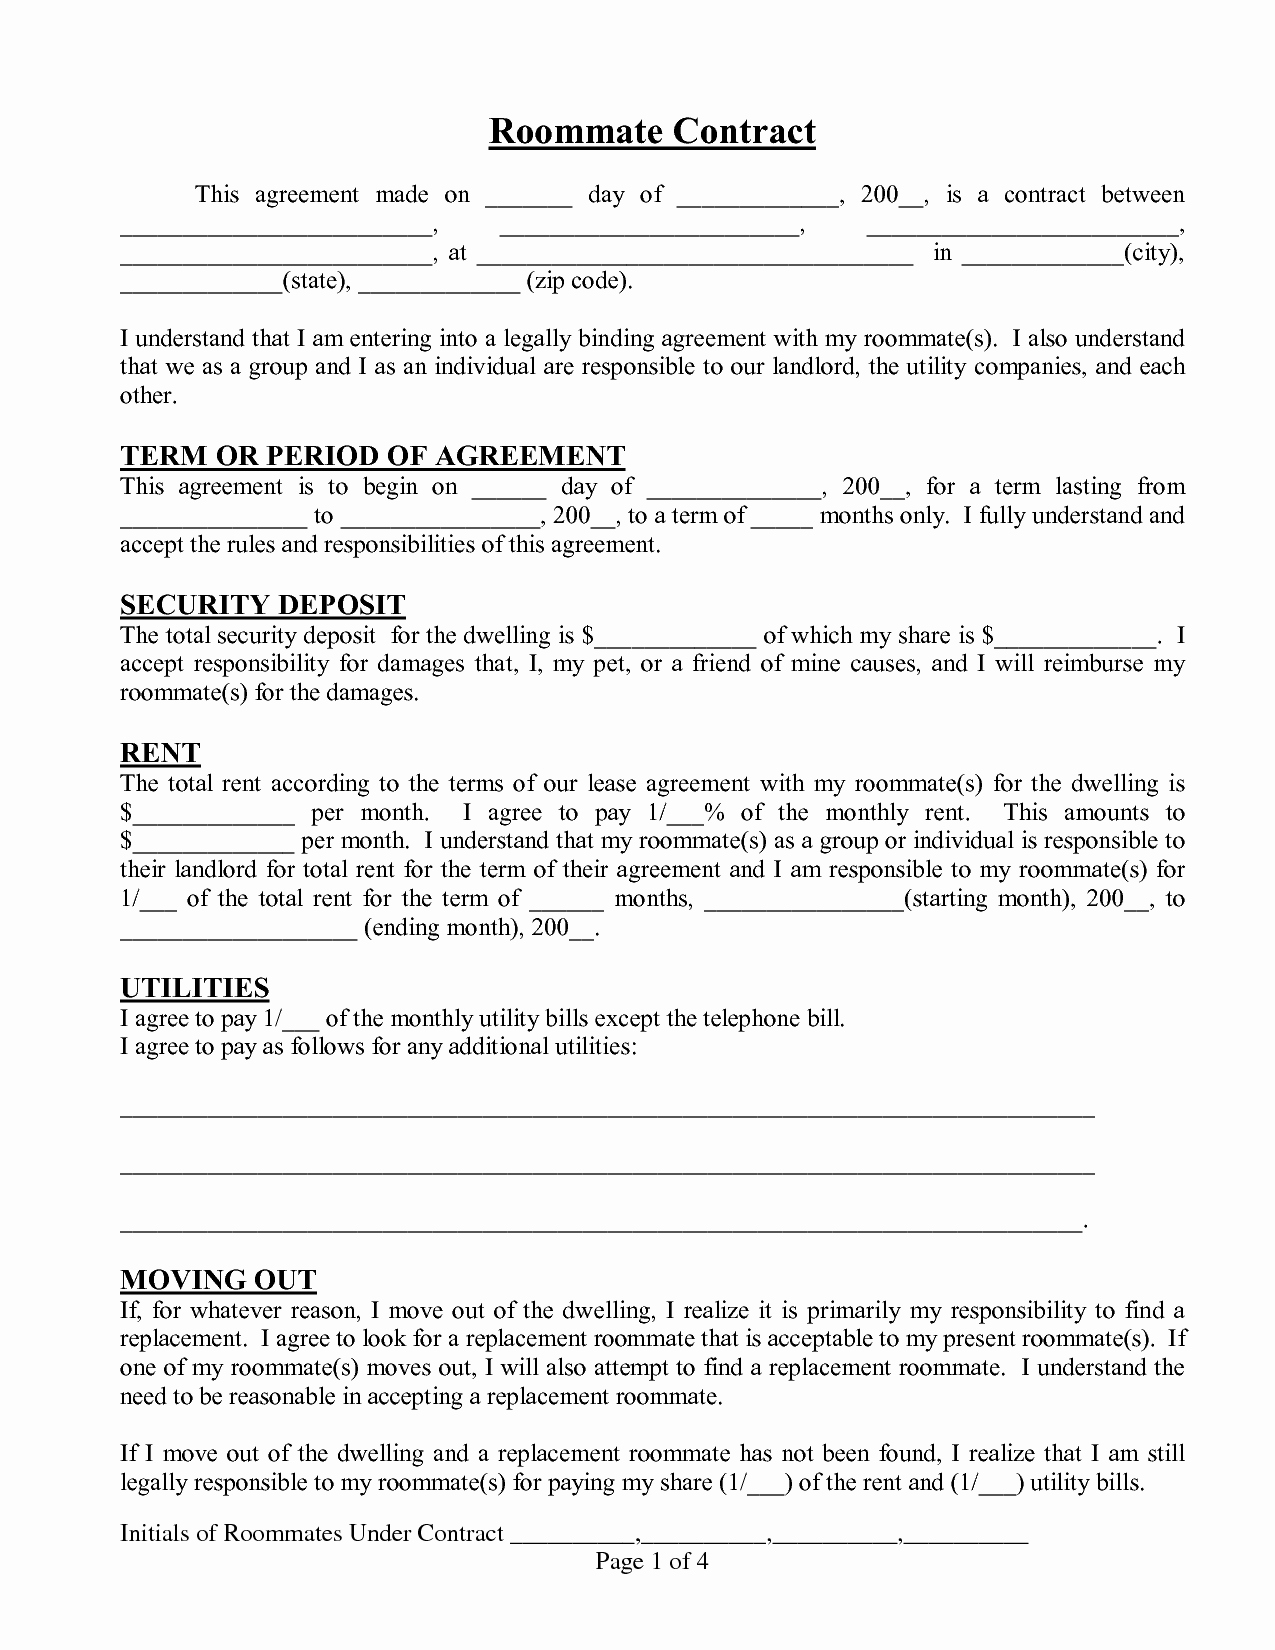 Roommate Agreement Template Free New Roommate Agreement Template